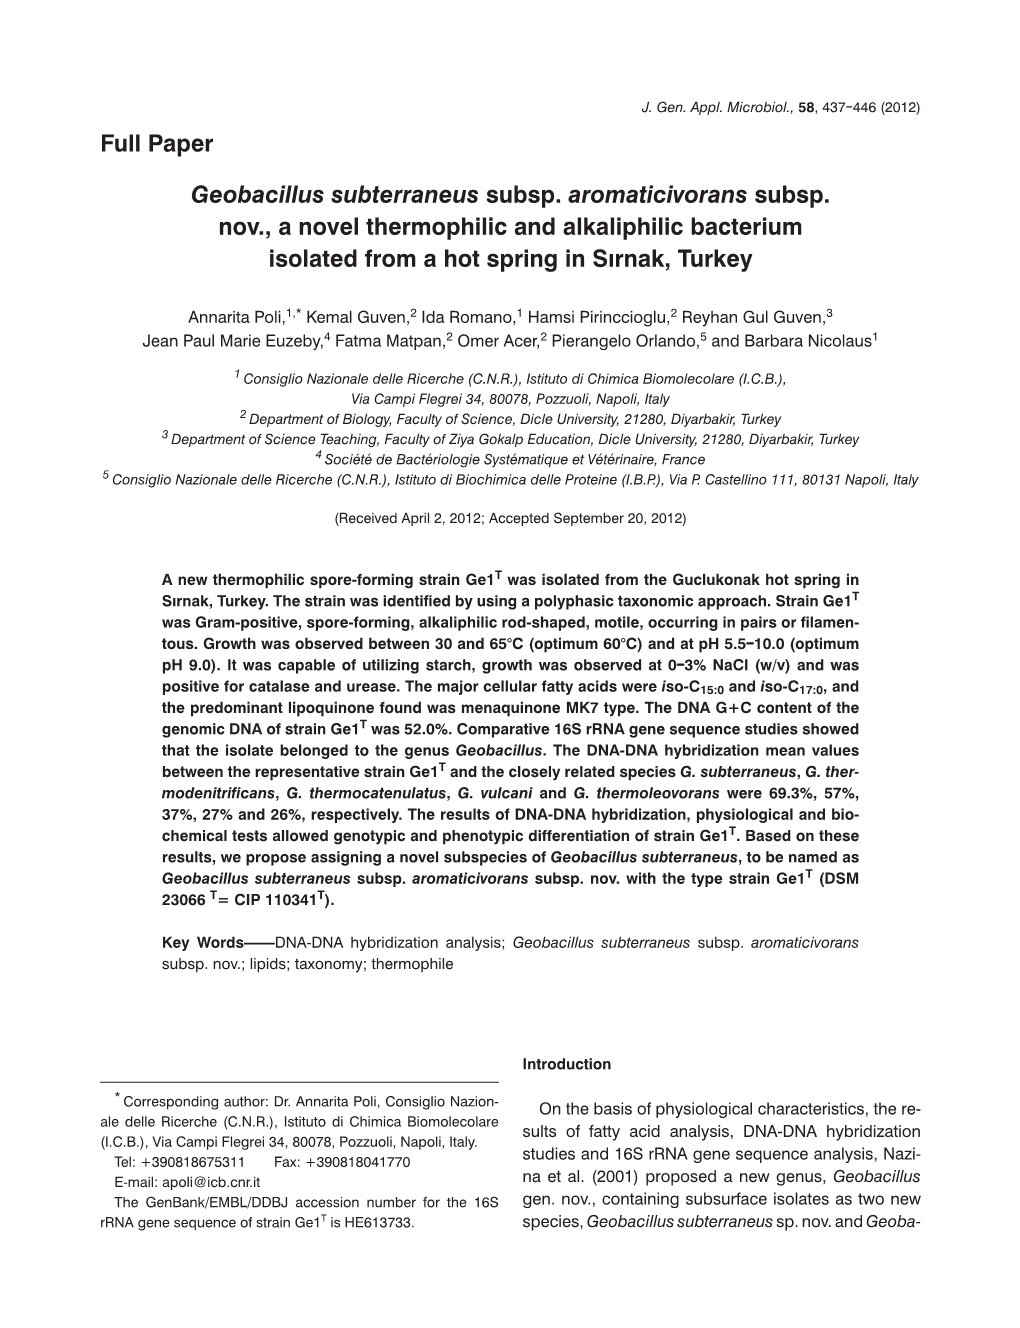 Geobacillus Subterraneus Subsp. Aromaticivorans Subsp. Nov., a Novel Thermophilic and Alkaliphilic Bacterium Isolated from a Hot Spring in Sırnak, Turkey